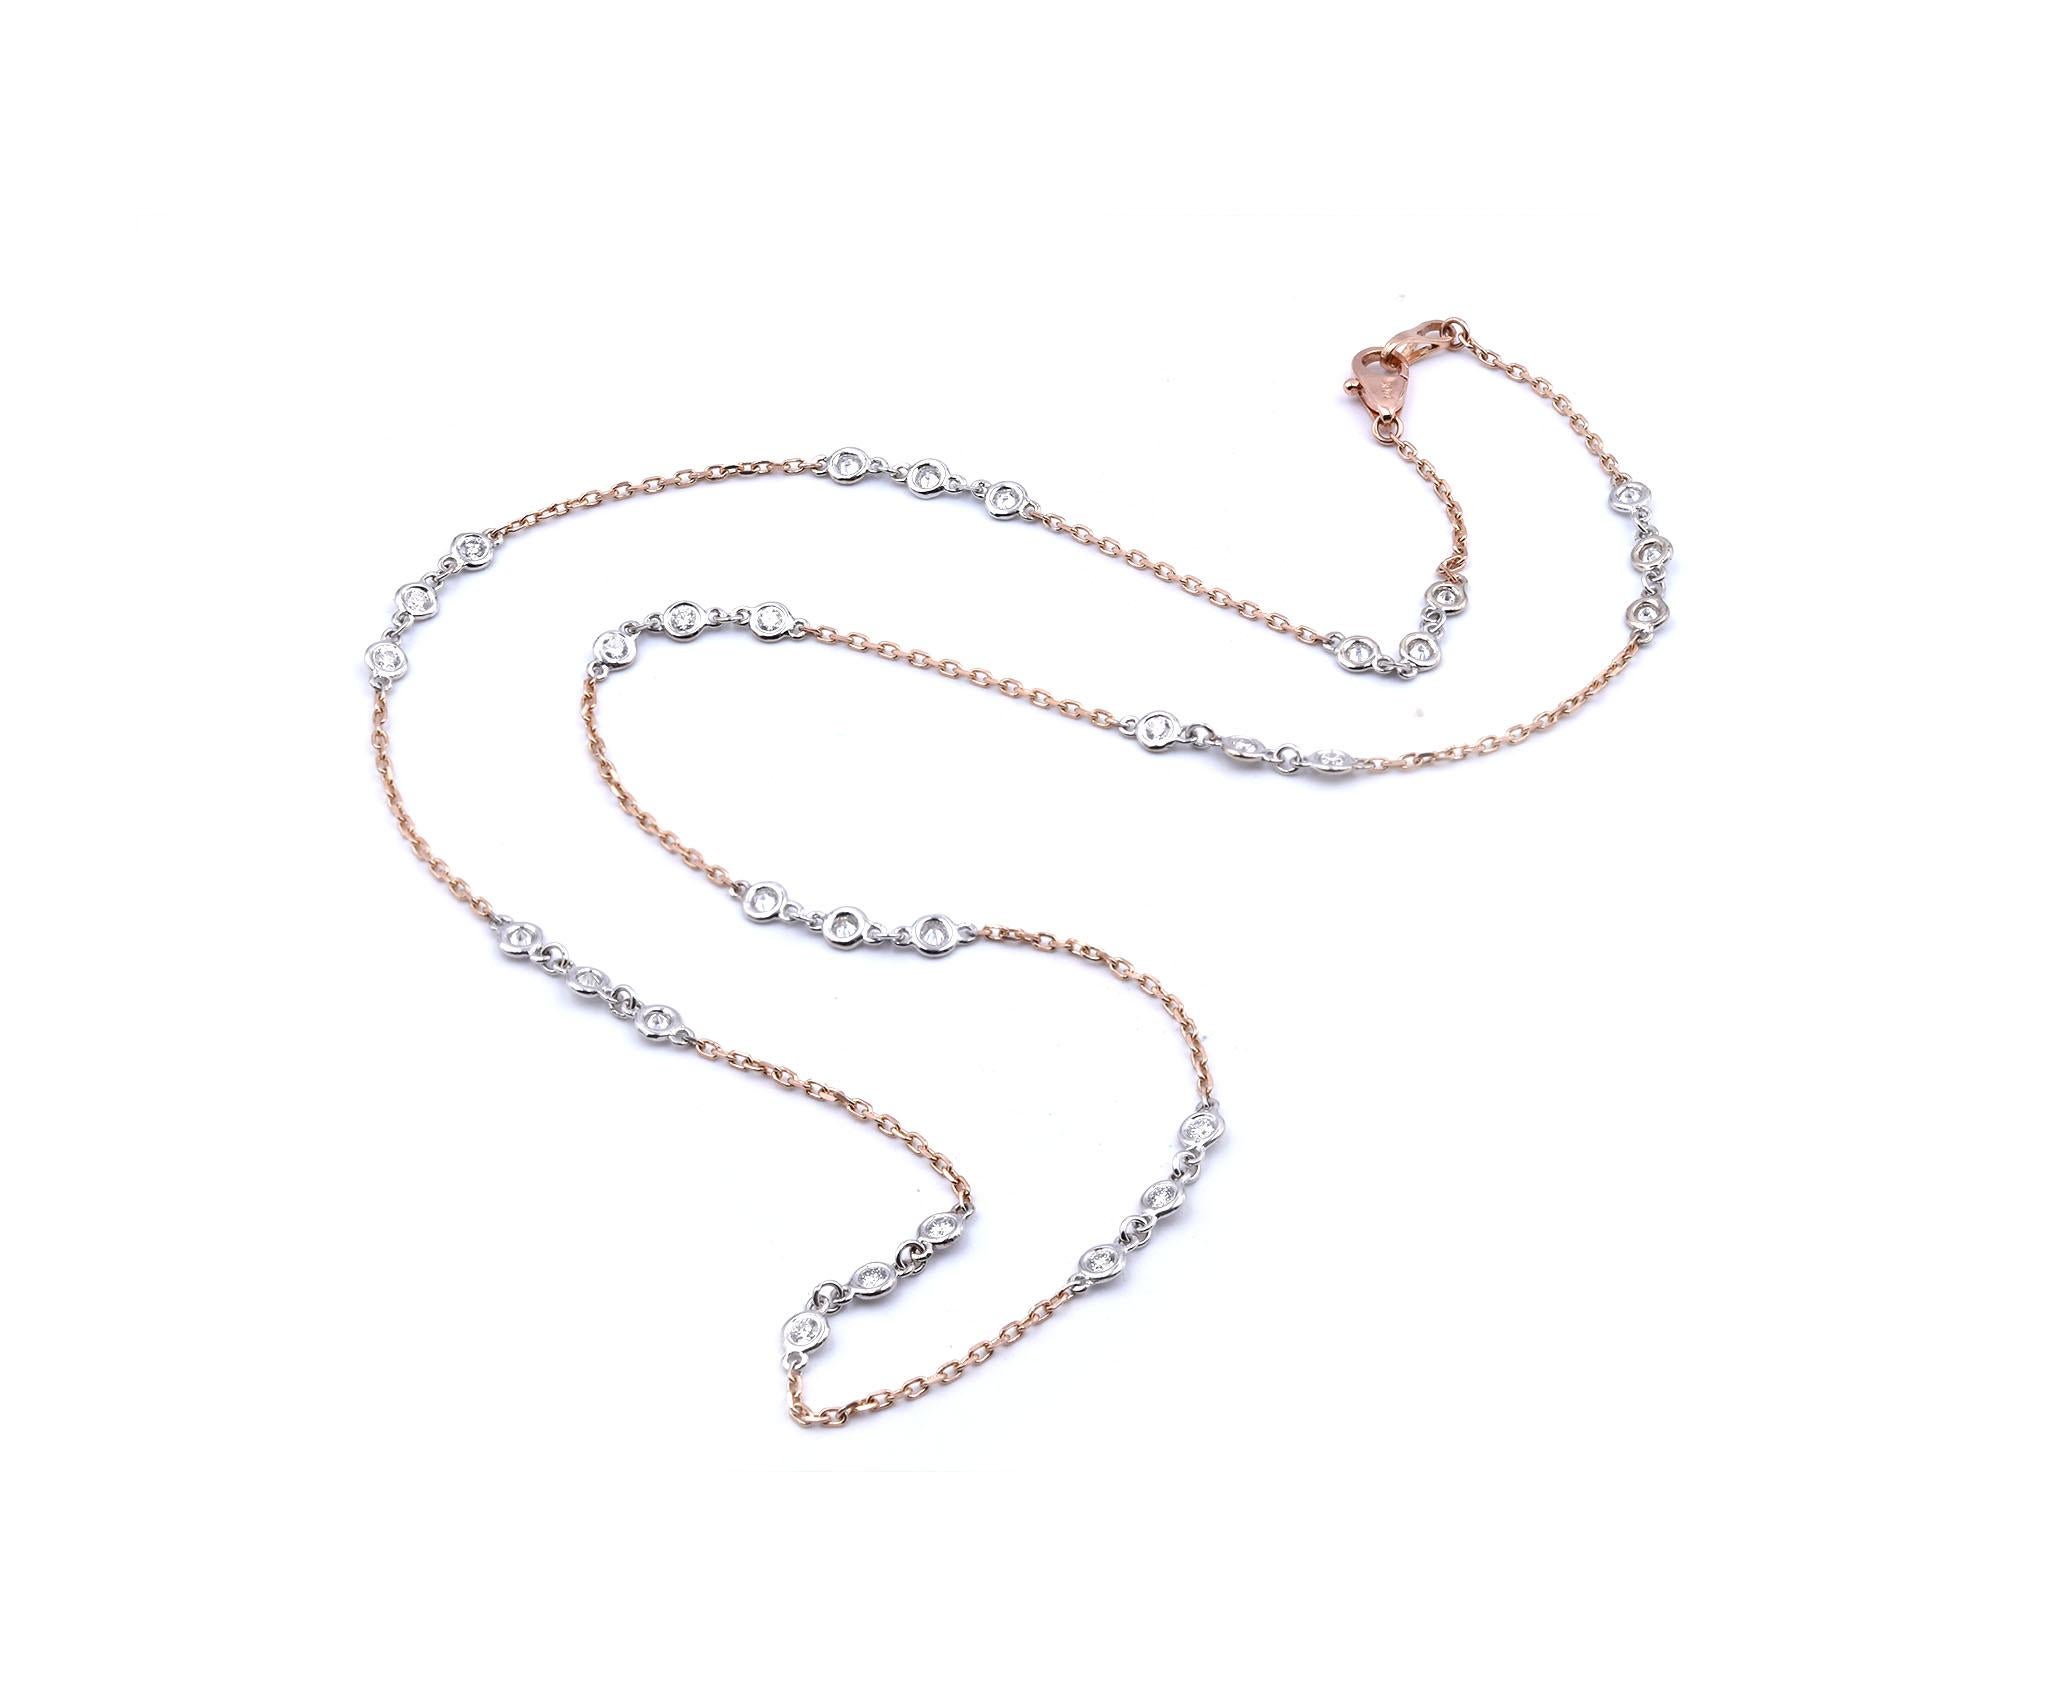 Designer: custom
Material: 14K rose gold
Diamonds: 30 round brilliant cut = .90cttw
Color: G
Clarity: VS
Dimensions: necklace measures 18-inches
Weight: 3.72 grams